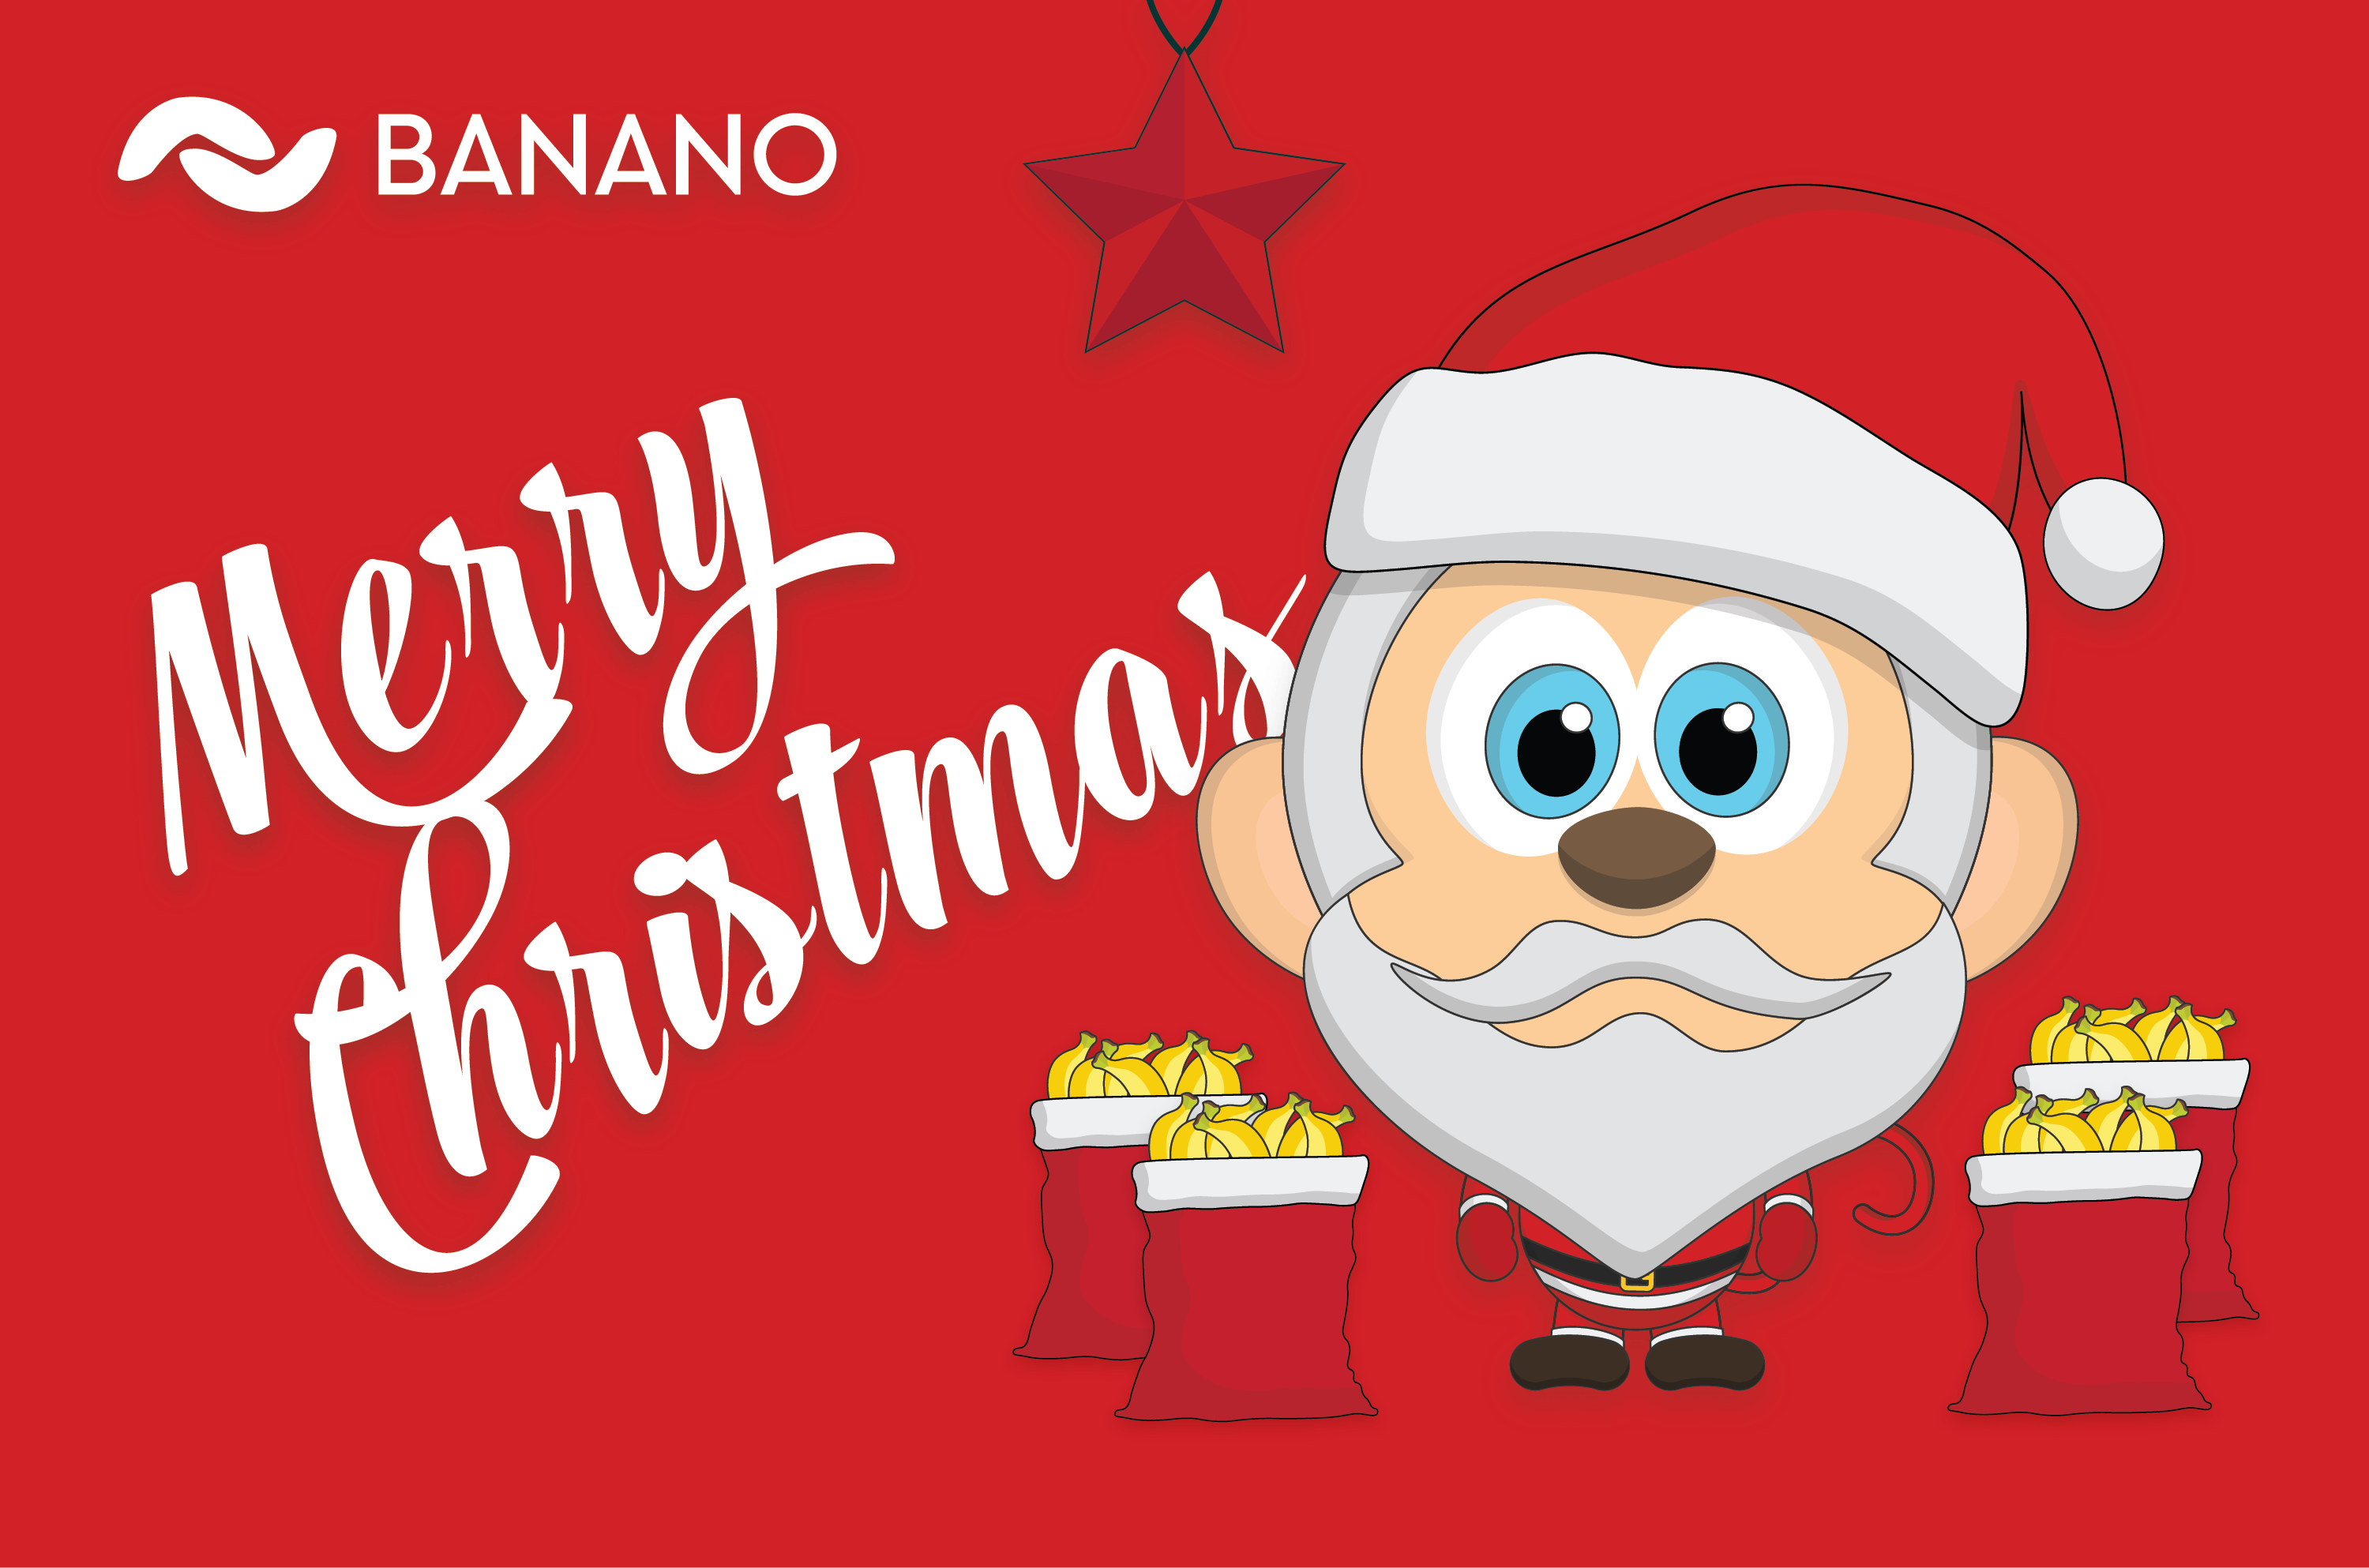 Merry Christmas and a Prosperous New Year from BANANO!